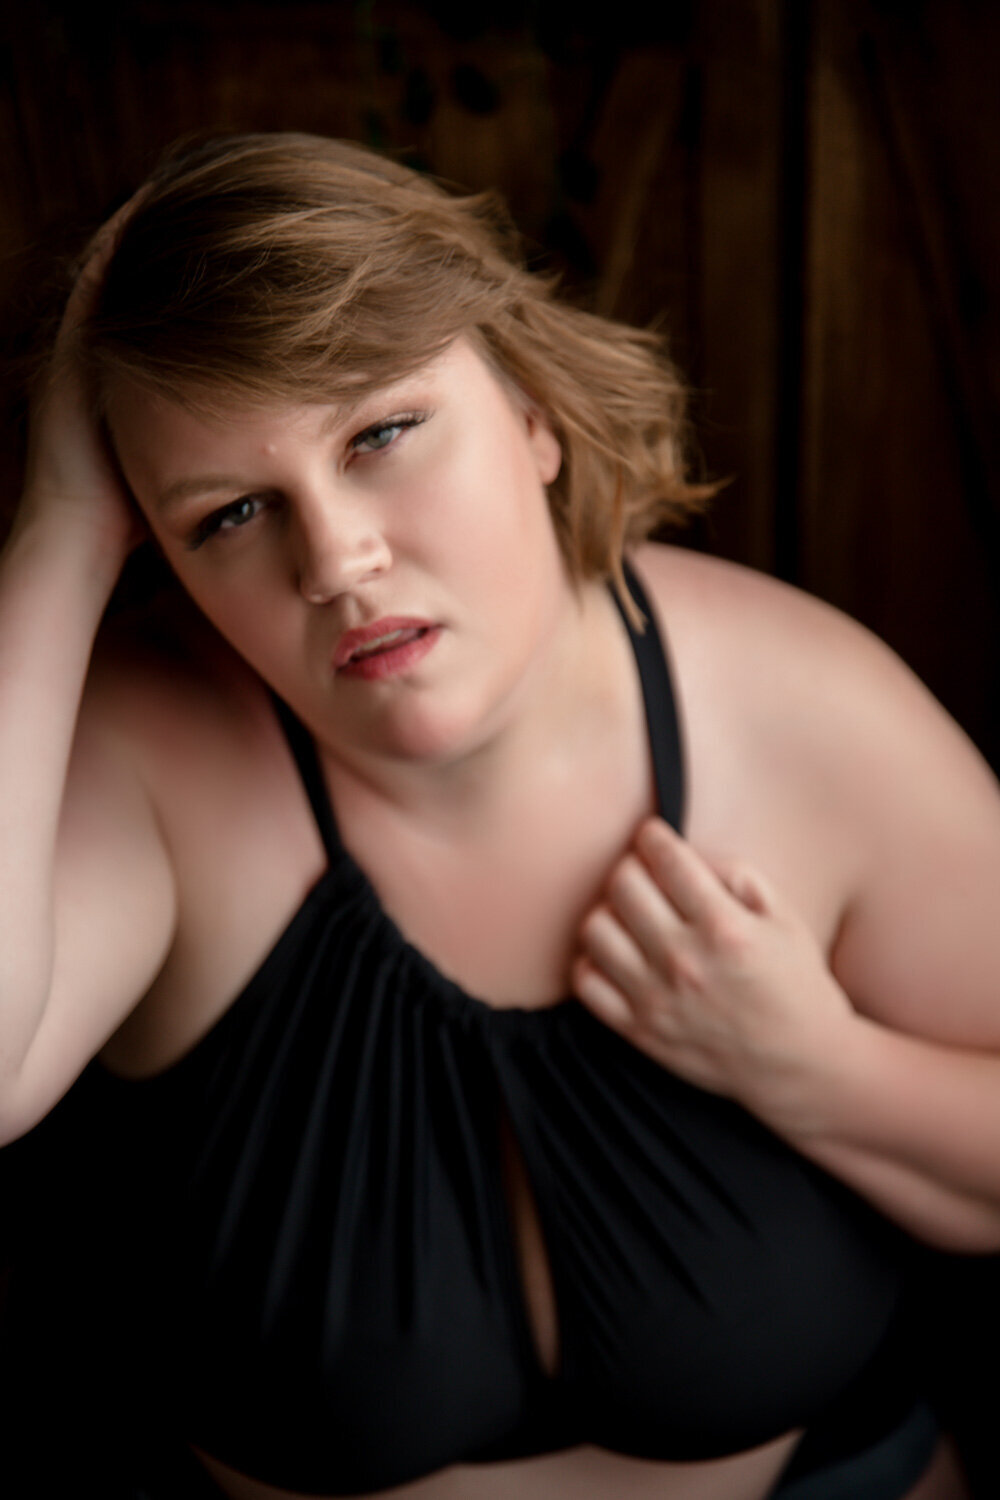 woman wearing a black top posing for a portrait session in Glencoe, Minnesota.